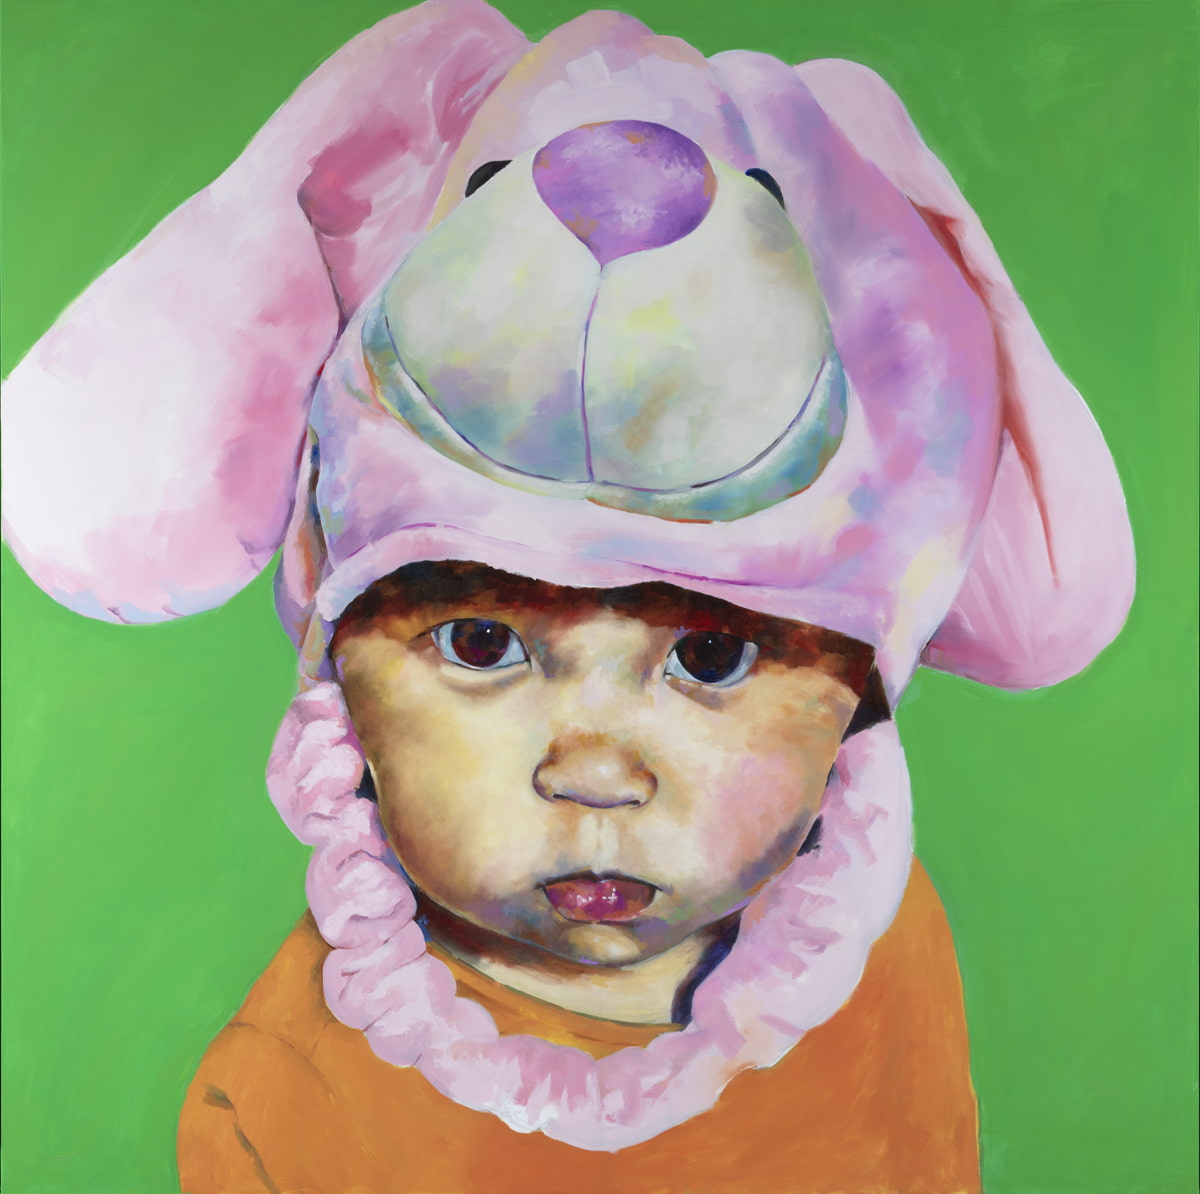 Gillian O’Shea: Lockdown, 2020, oil on canvas, 120 x 120cm | Zurich Portrait Prize 2020 | Viewable online from 1 April 2021; in venue 10 May – Sunday 11 July 2021 | Crawford Art Gallery